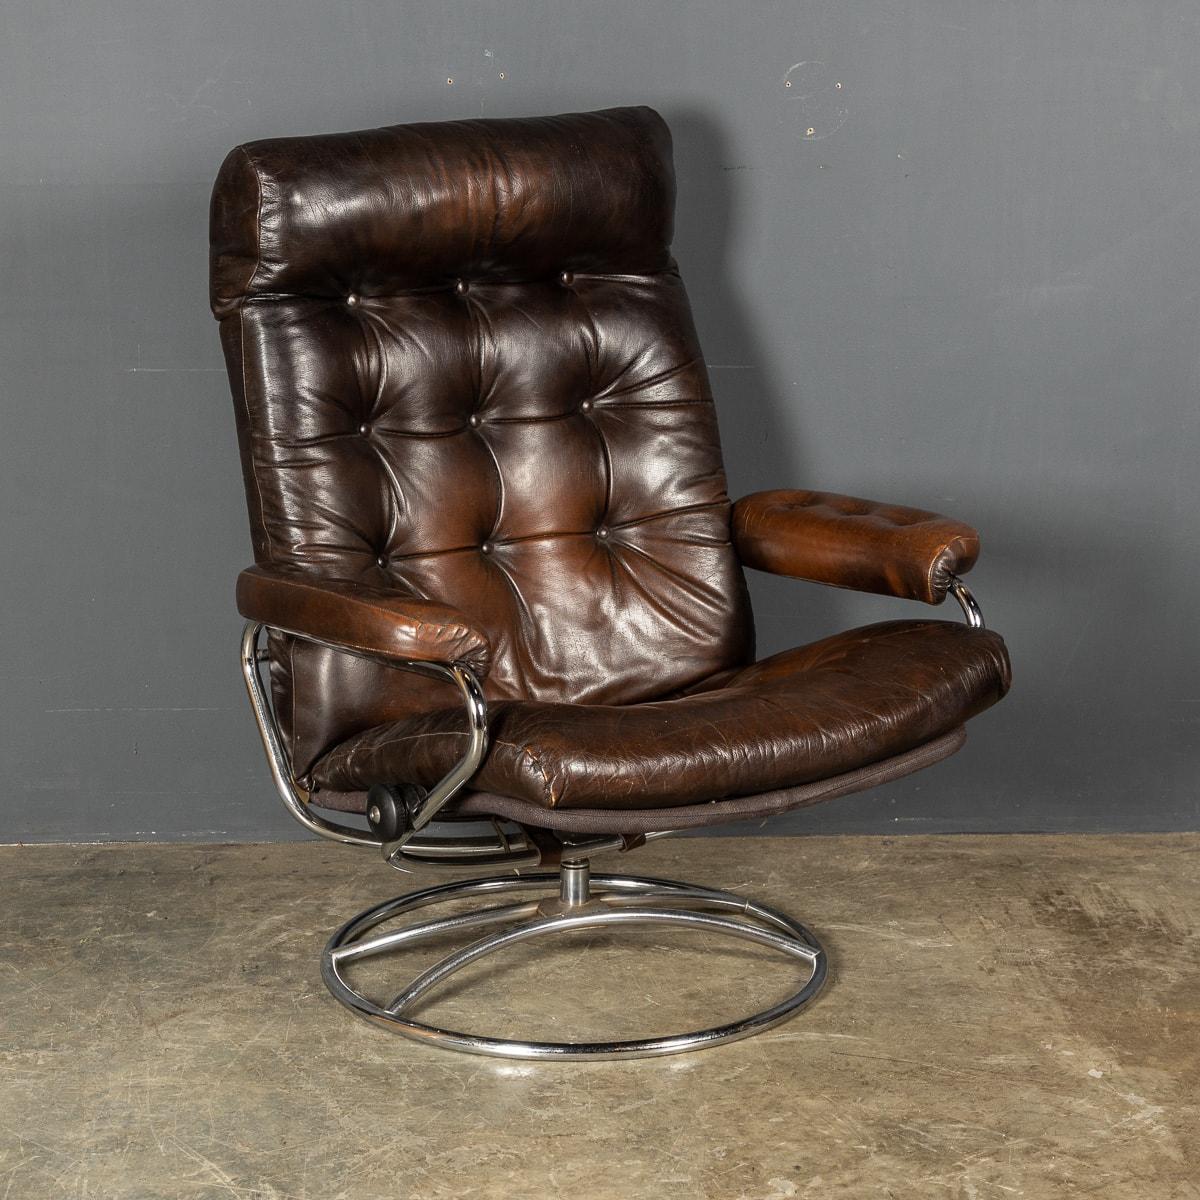 An extremely comfortable buttoned brown leather swivel chair on a circular chrome foot, with the added feature of reclining, using the mechanism on either side of the seat this chair can be locked in the desired reclining position,